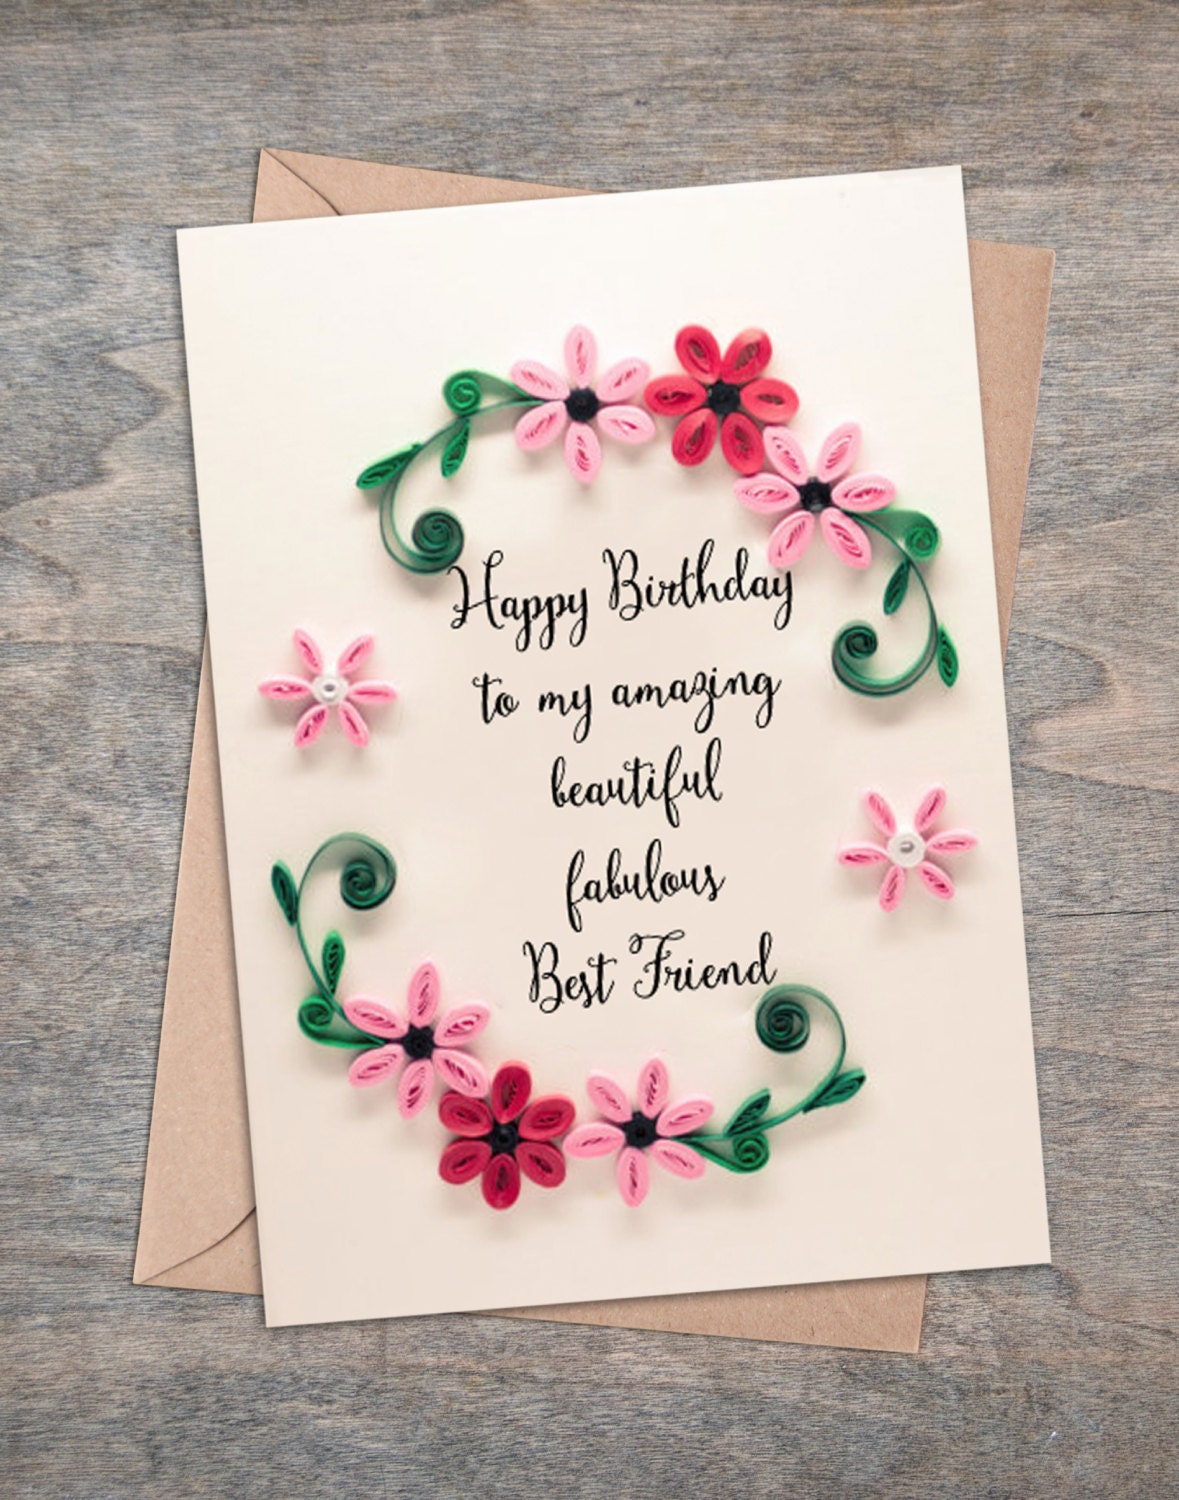 The Best Birthday Cards For A Friend Home Family Style And Art Ideas